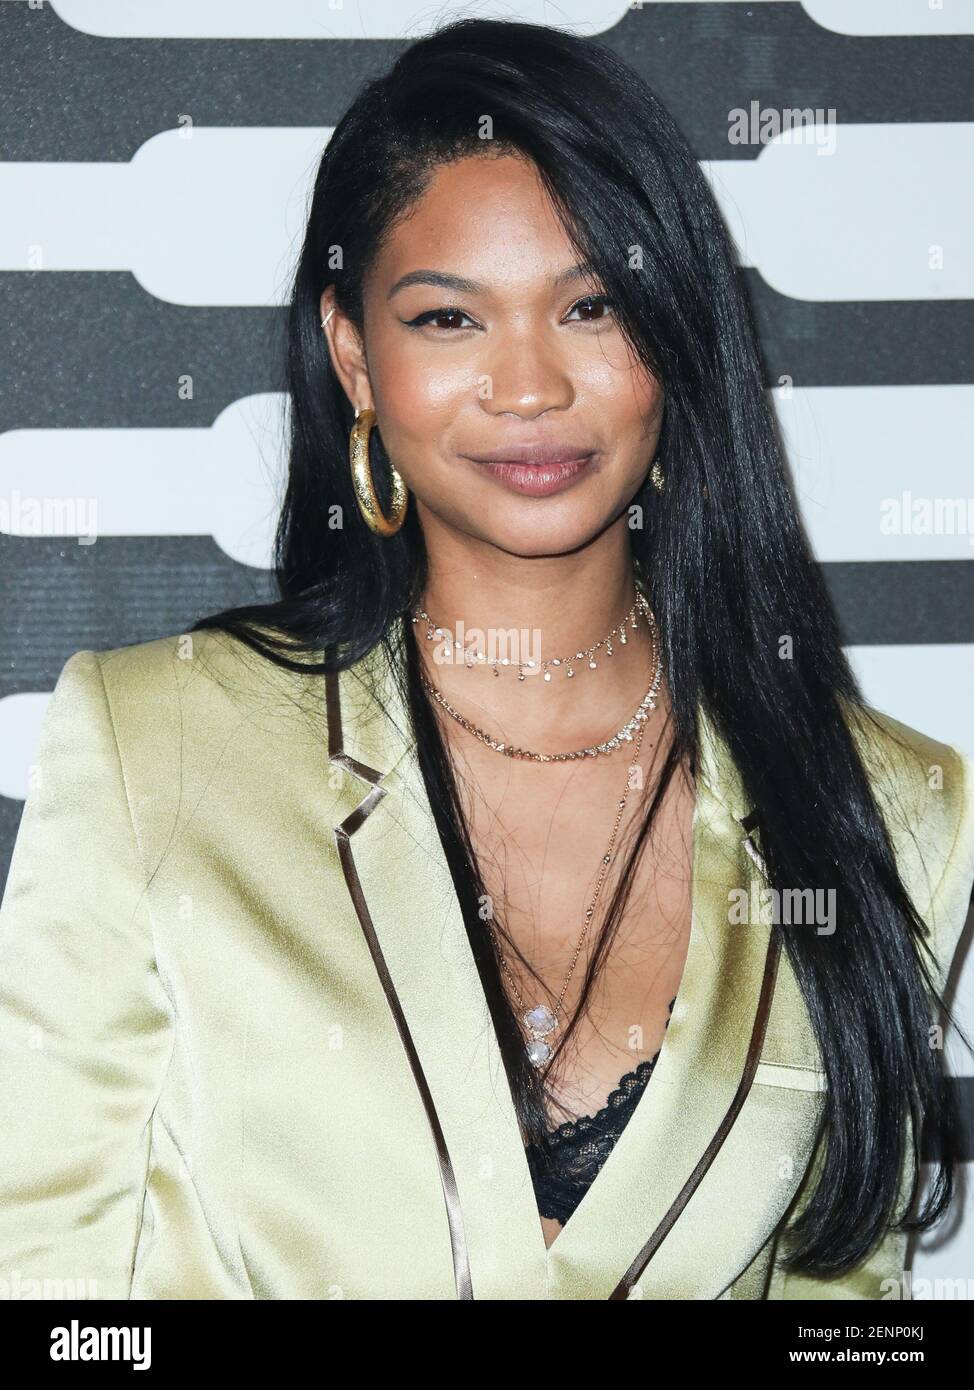 BROOKLYN, NEW YORK CITY, NEW YORK, USA - SEPTEMBER 10: Chanel Iman arrives  at the Savage X Fenty Show Presented By Amazon Prime Video held at Barclays  Center on September 10, 2019